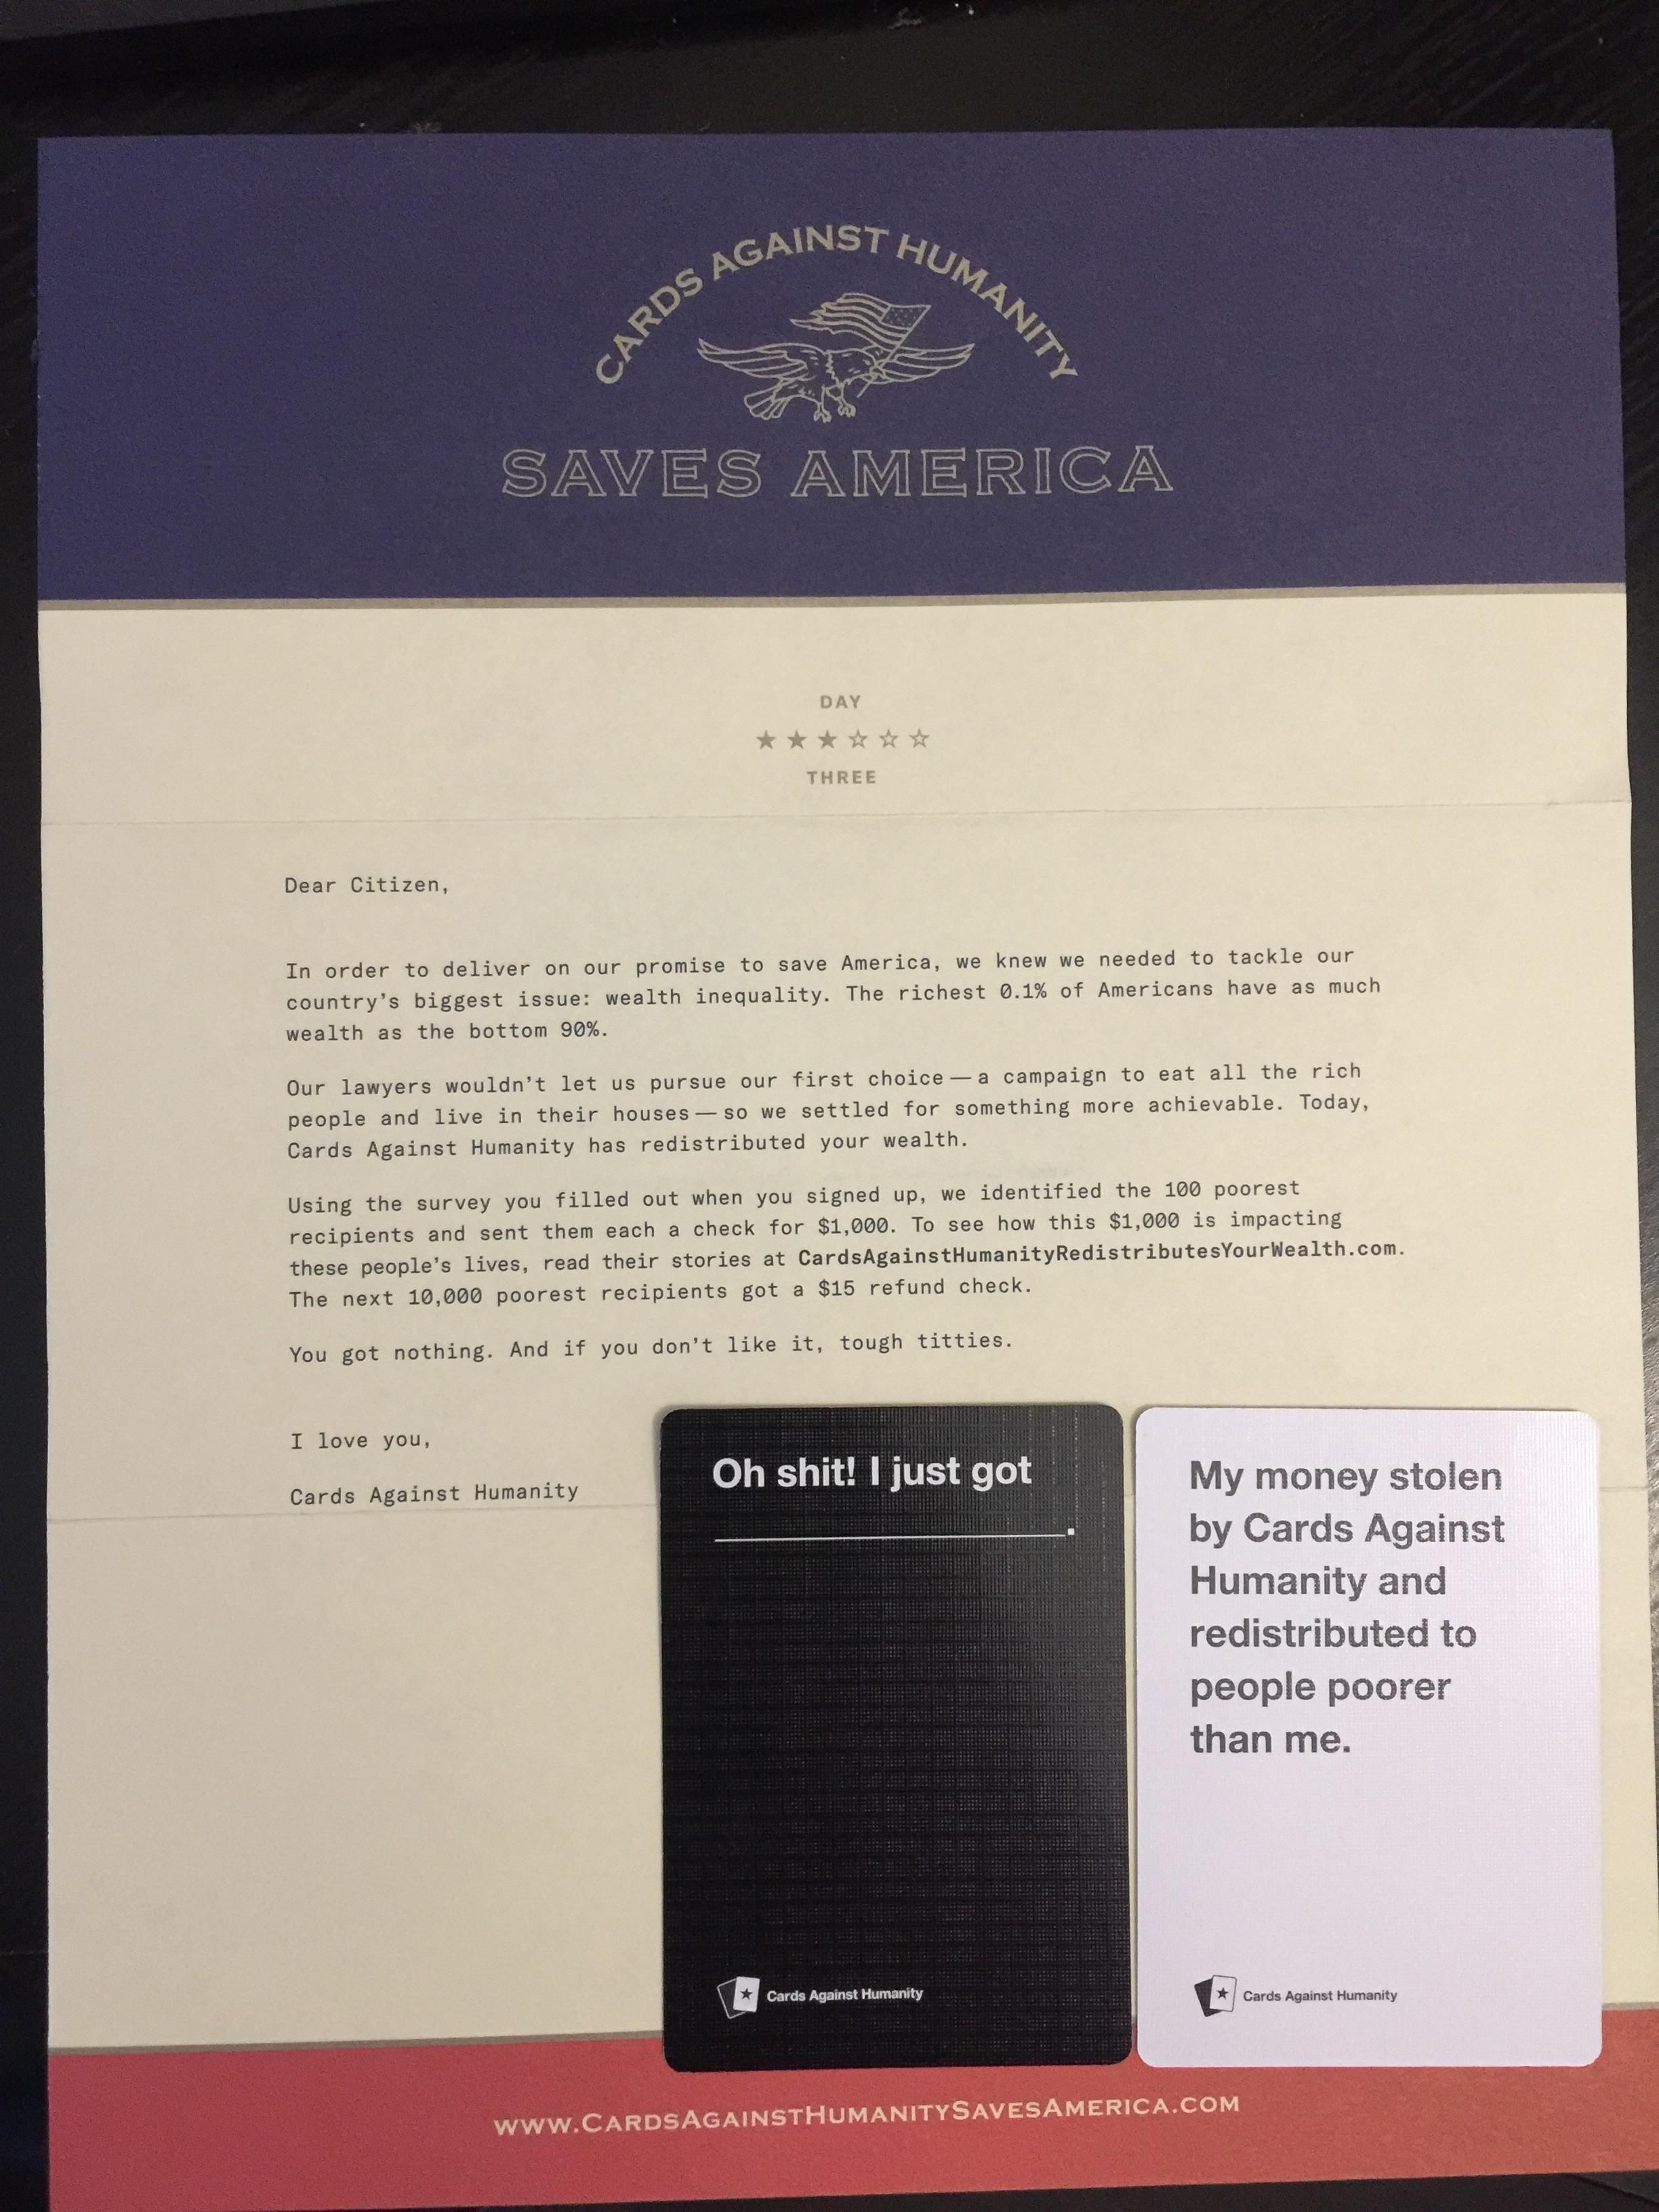 I just got my Cards Against Humanity day three gift. I had a good chuckle and thought you all might enjoy the thoughtful letter.